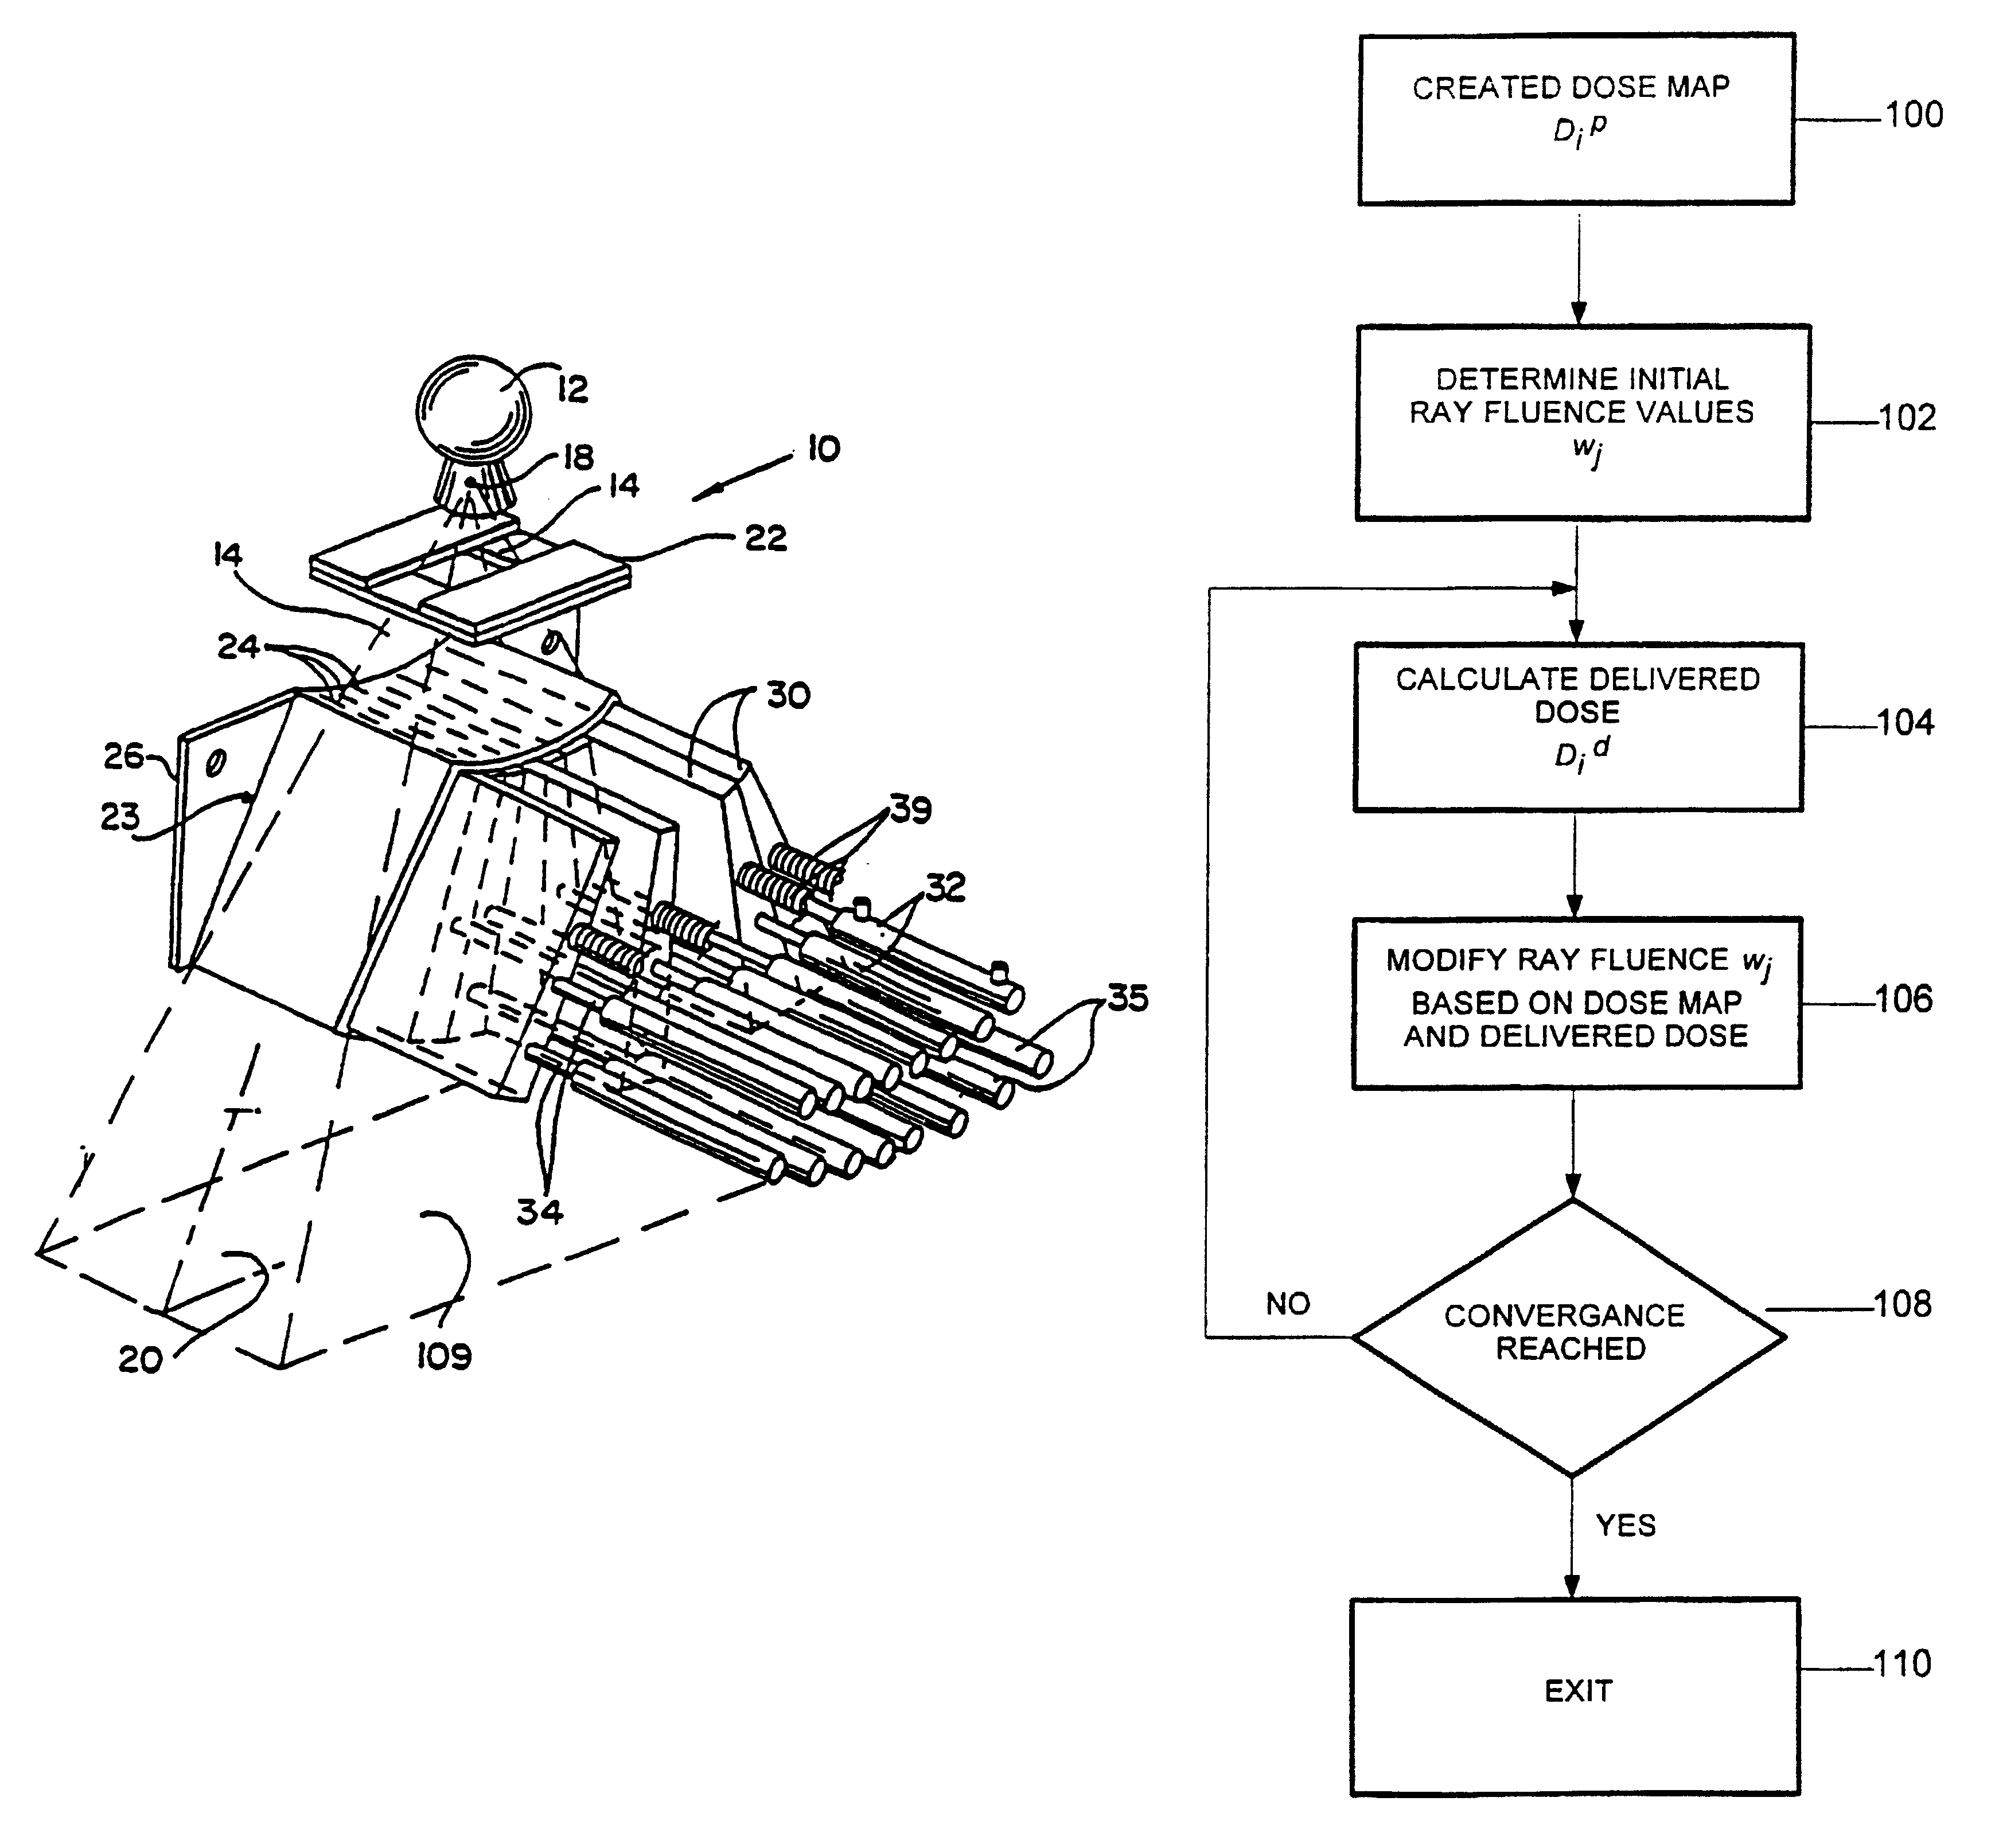 Method for preparing a radiation therapy plan